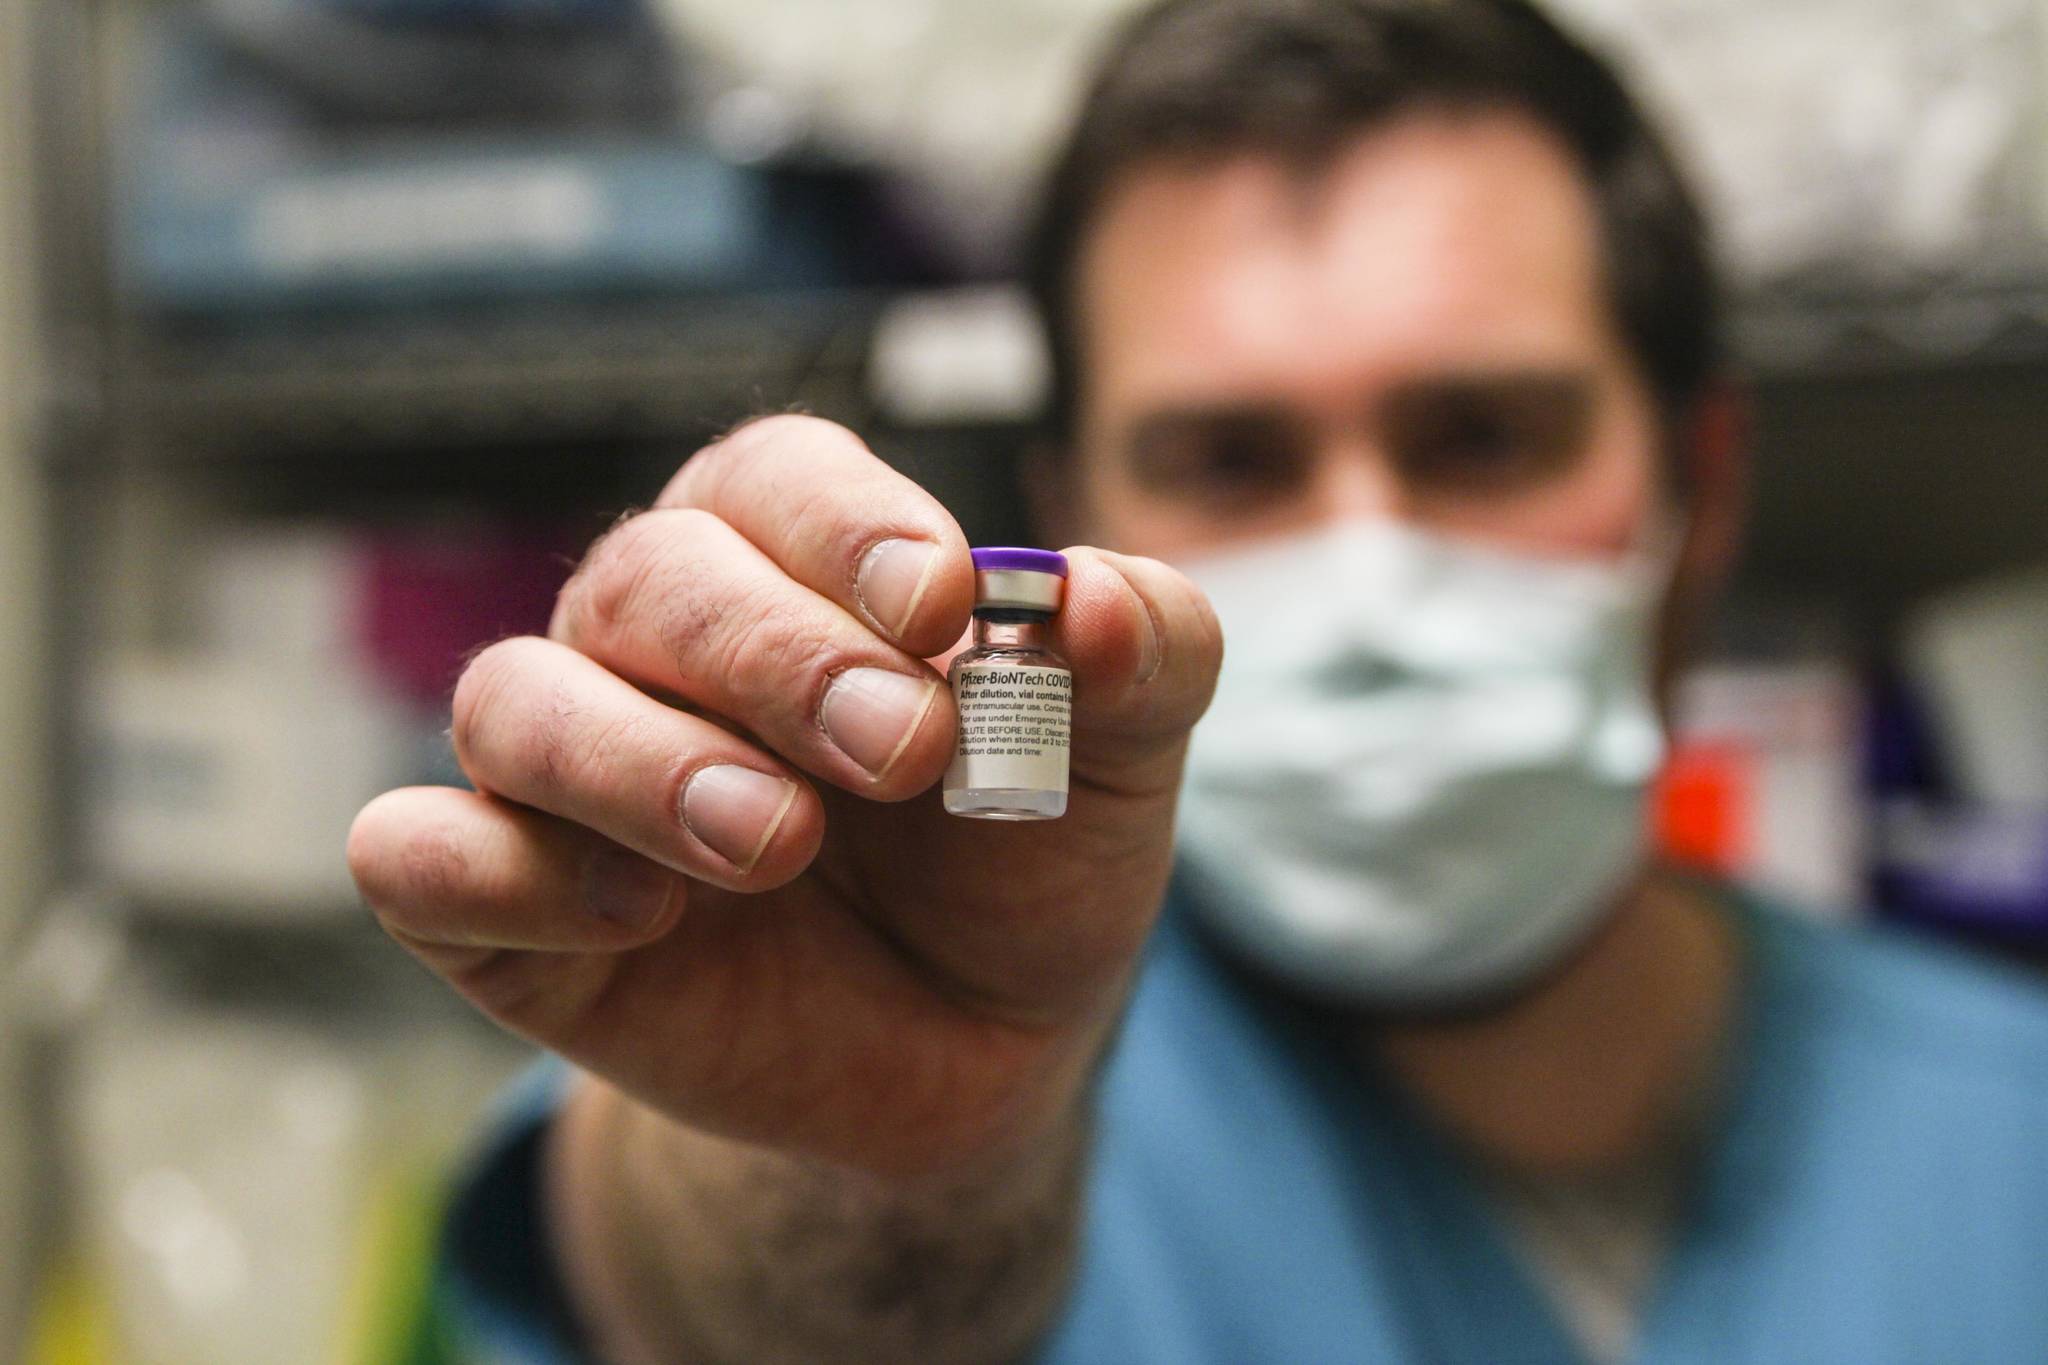 Bartlett Regional Hospital pharmacist Chris Sperry holds a vial of COVID-19 vaccine on Dec. 15, 2020. BRH immediately began vaccinating its personnel upon receipt of the vaccine. (Michael S. Lockett / Juneau Empire)